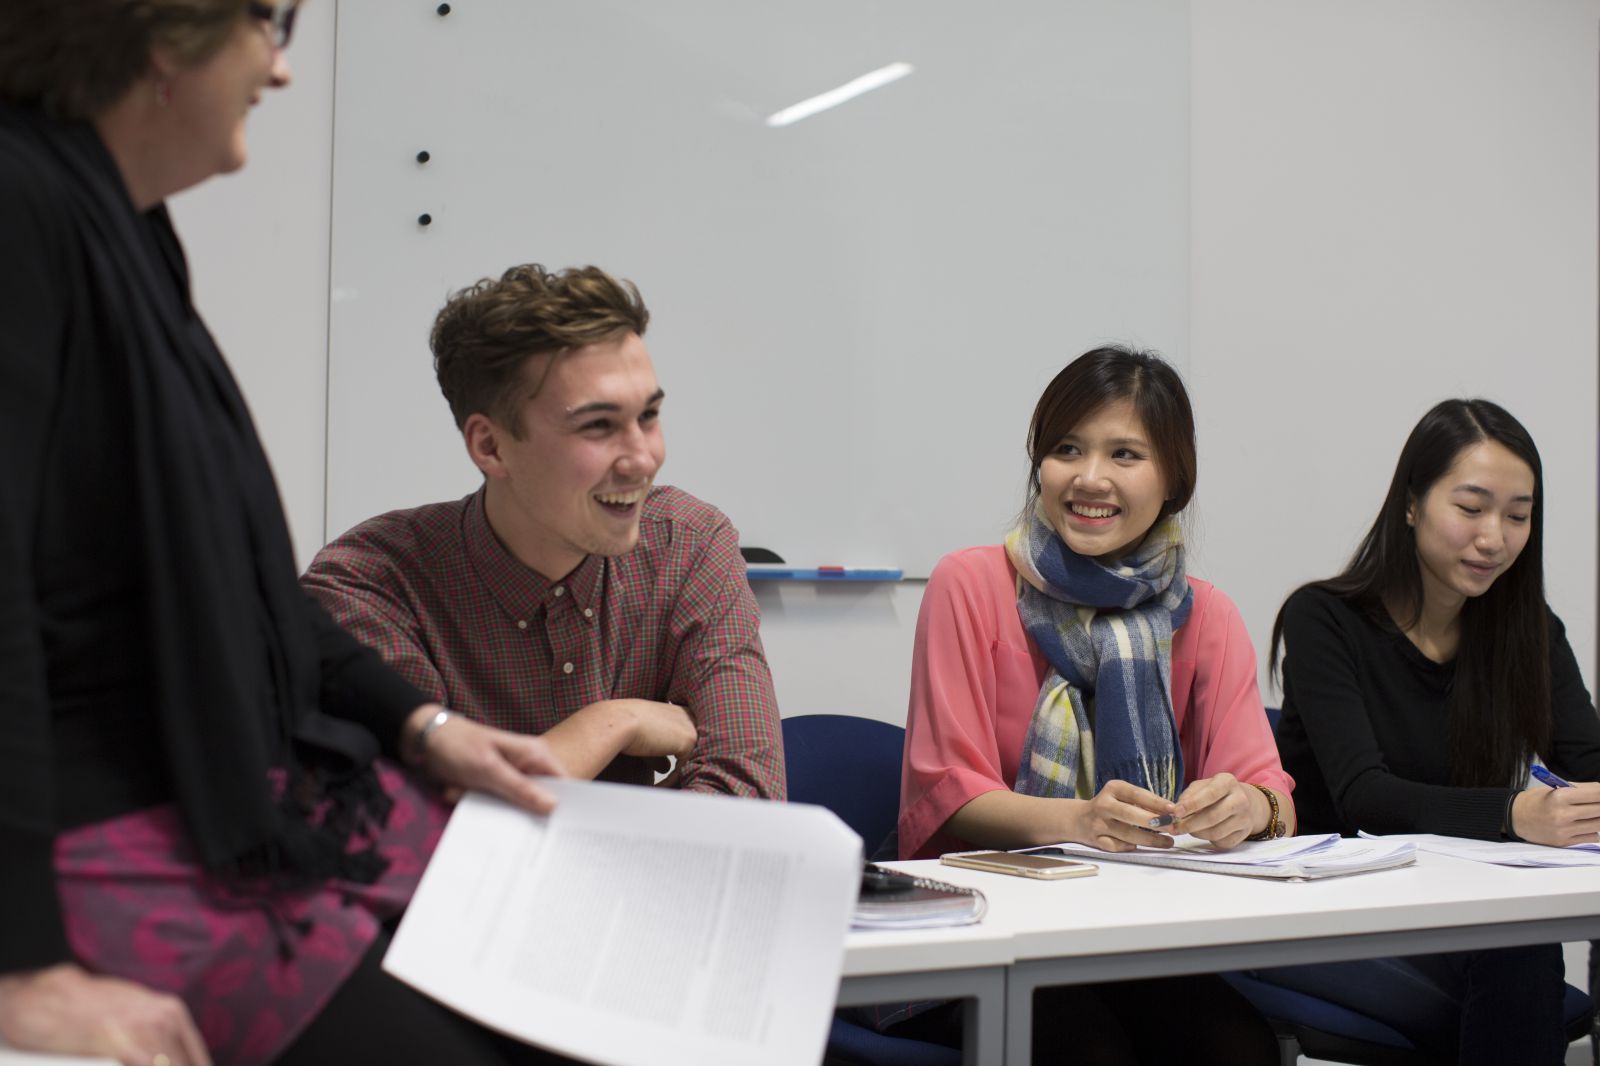 Students in a seminar at the University of Sussex